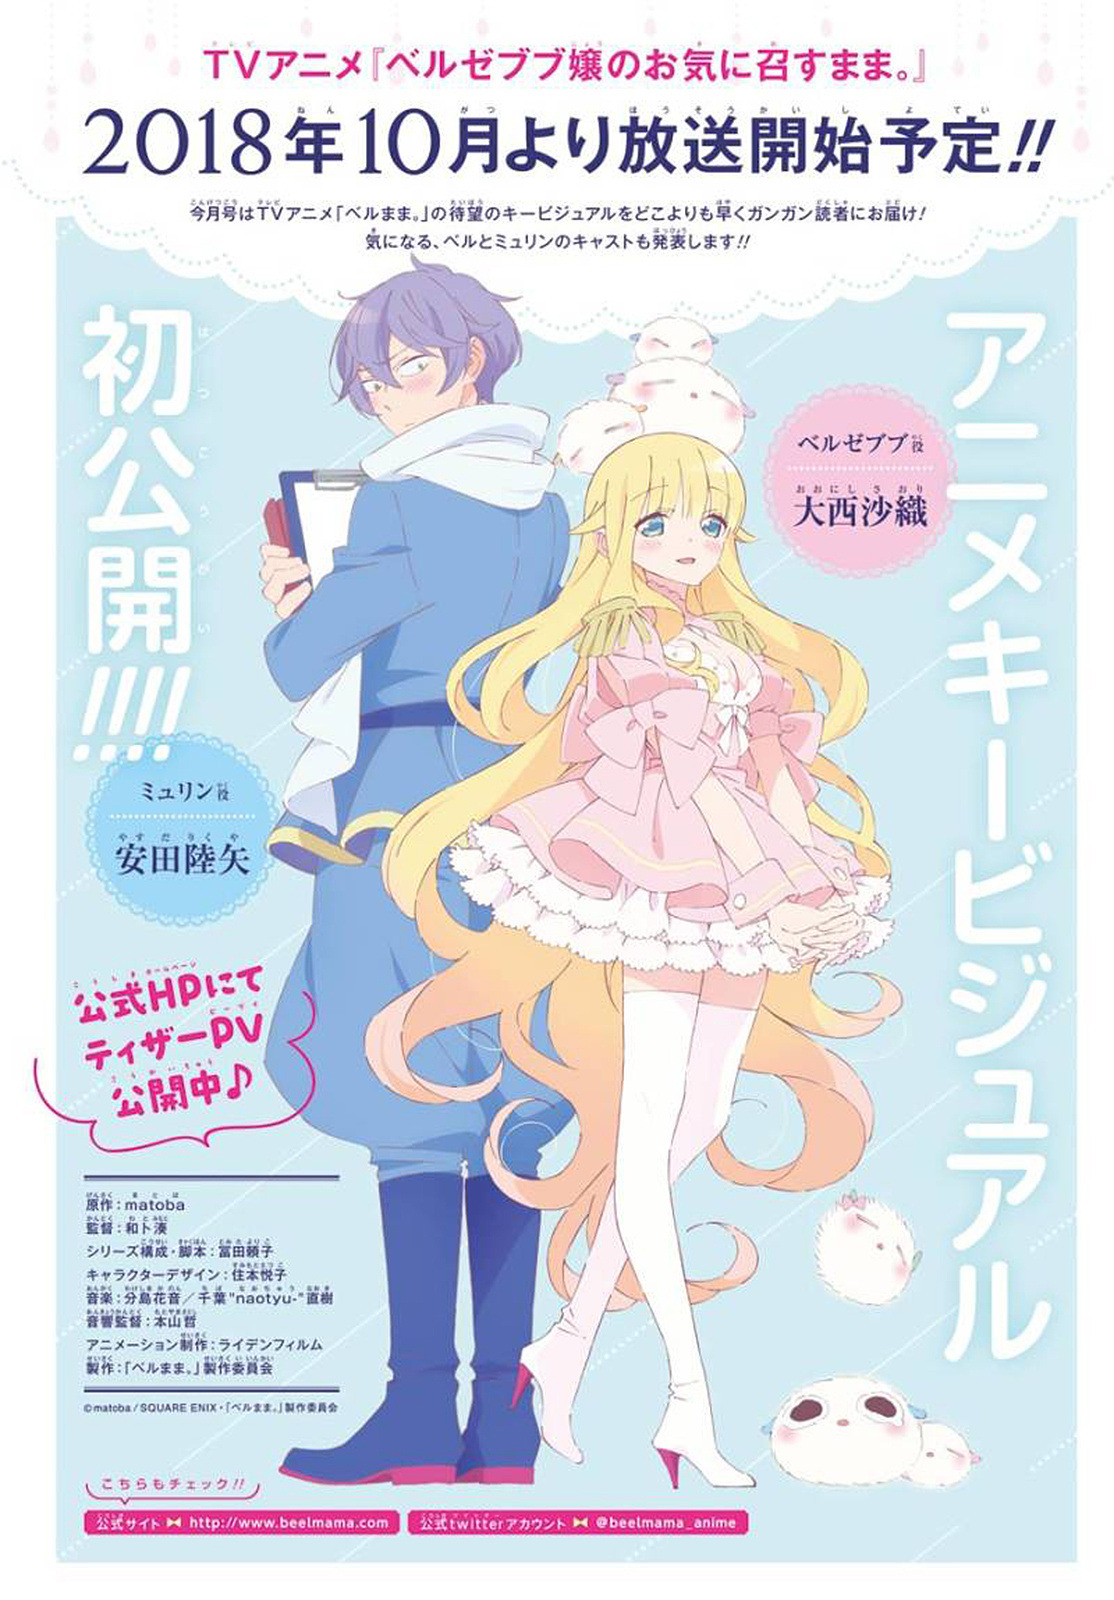 The first anime key visual and staff listing for Ã¢ÂÂBeelzebub-jou no Okinimesu mamaÃ¢ÂÂ has been revealed. Series premiere October.
Ã¢ÂÂ¢ Director: Minato Kazuto
Ã¢ÂÂ¢ Script, Screenplay: Yoriko Tomita
Ã¢ÂÂ¢ Character Design: Etsuko Sumimoto
Ã¢ÂÂ¢ Music: Kanon Wakeshima,...